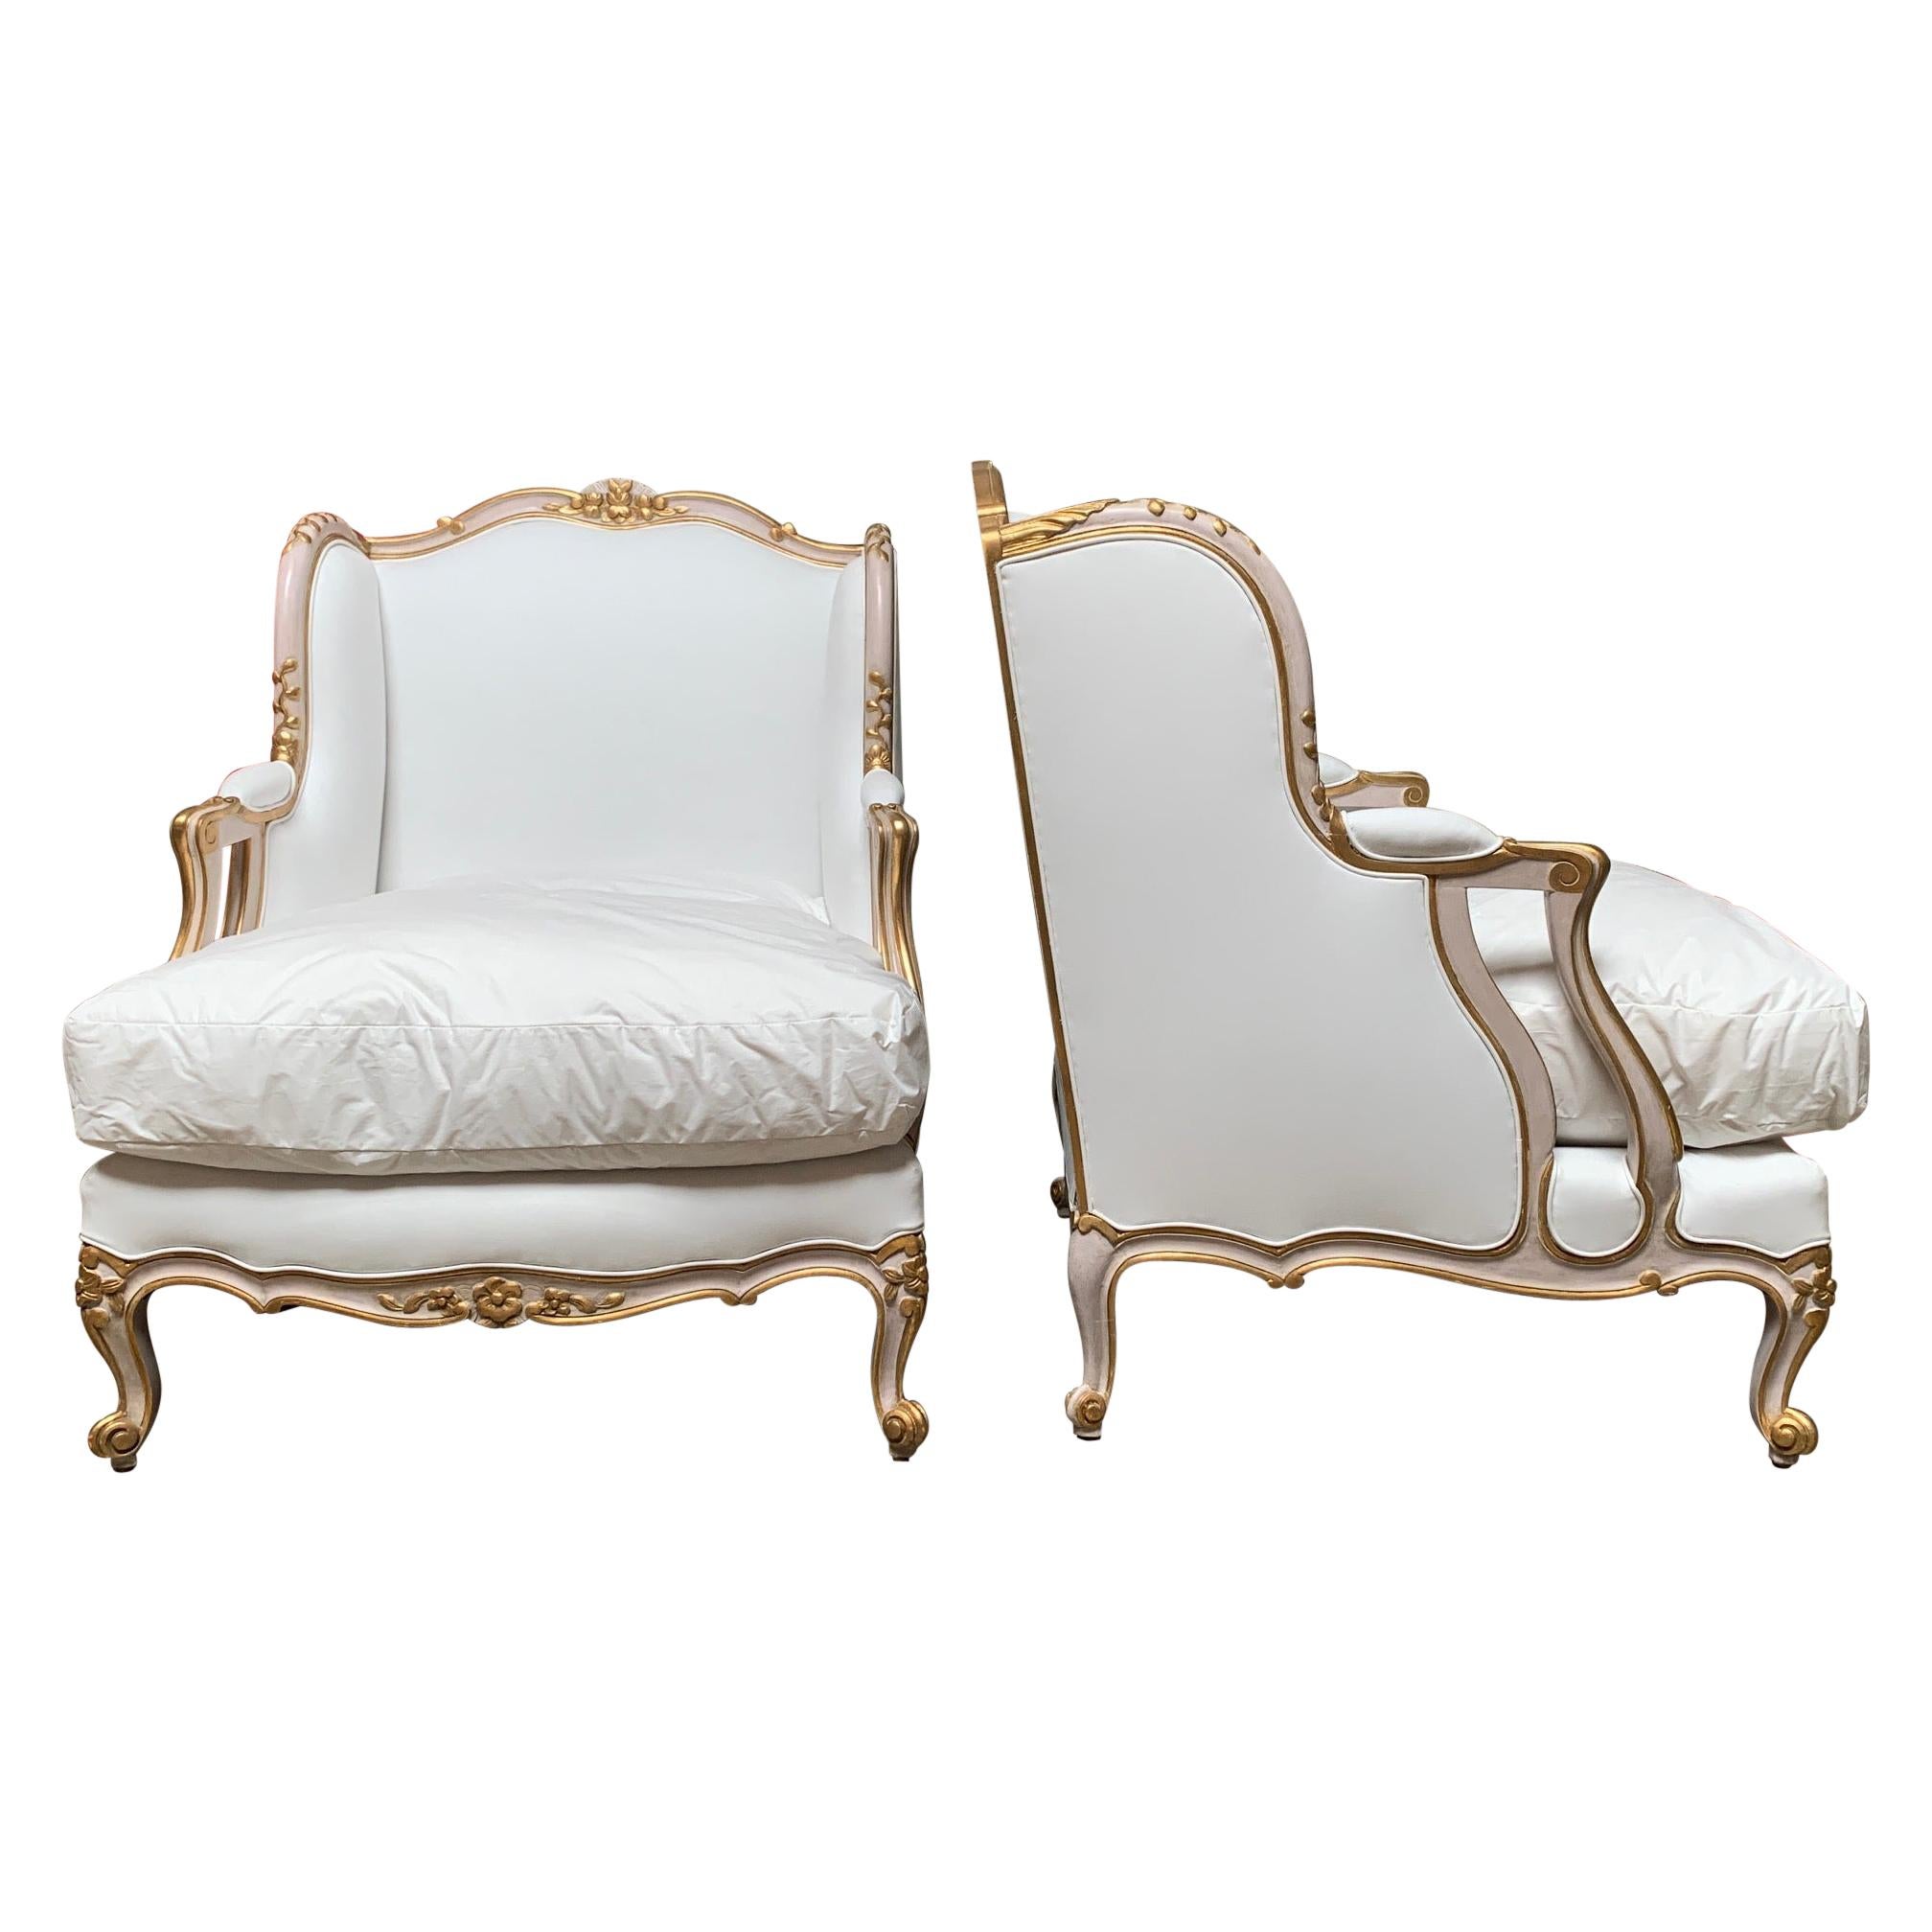 Pair of Large French Louis XV Style Bergeres with a Pink and Gilt Finish